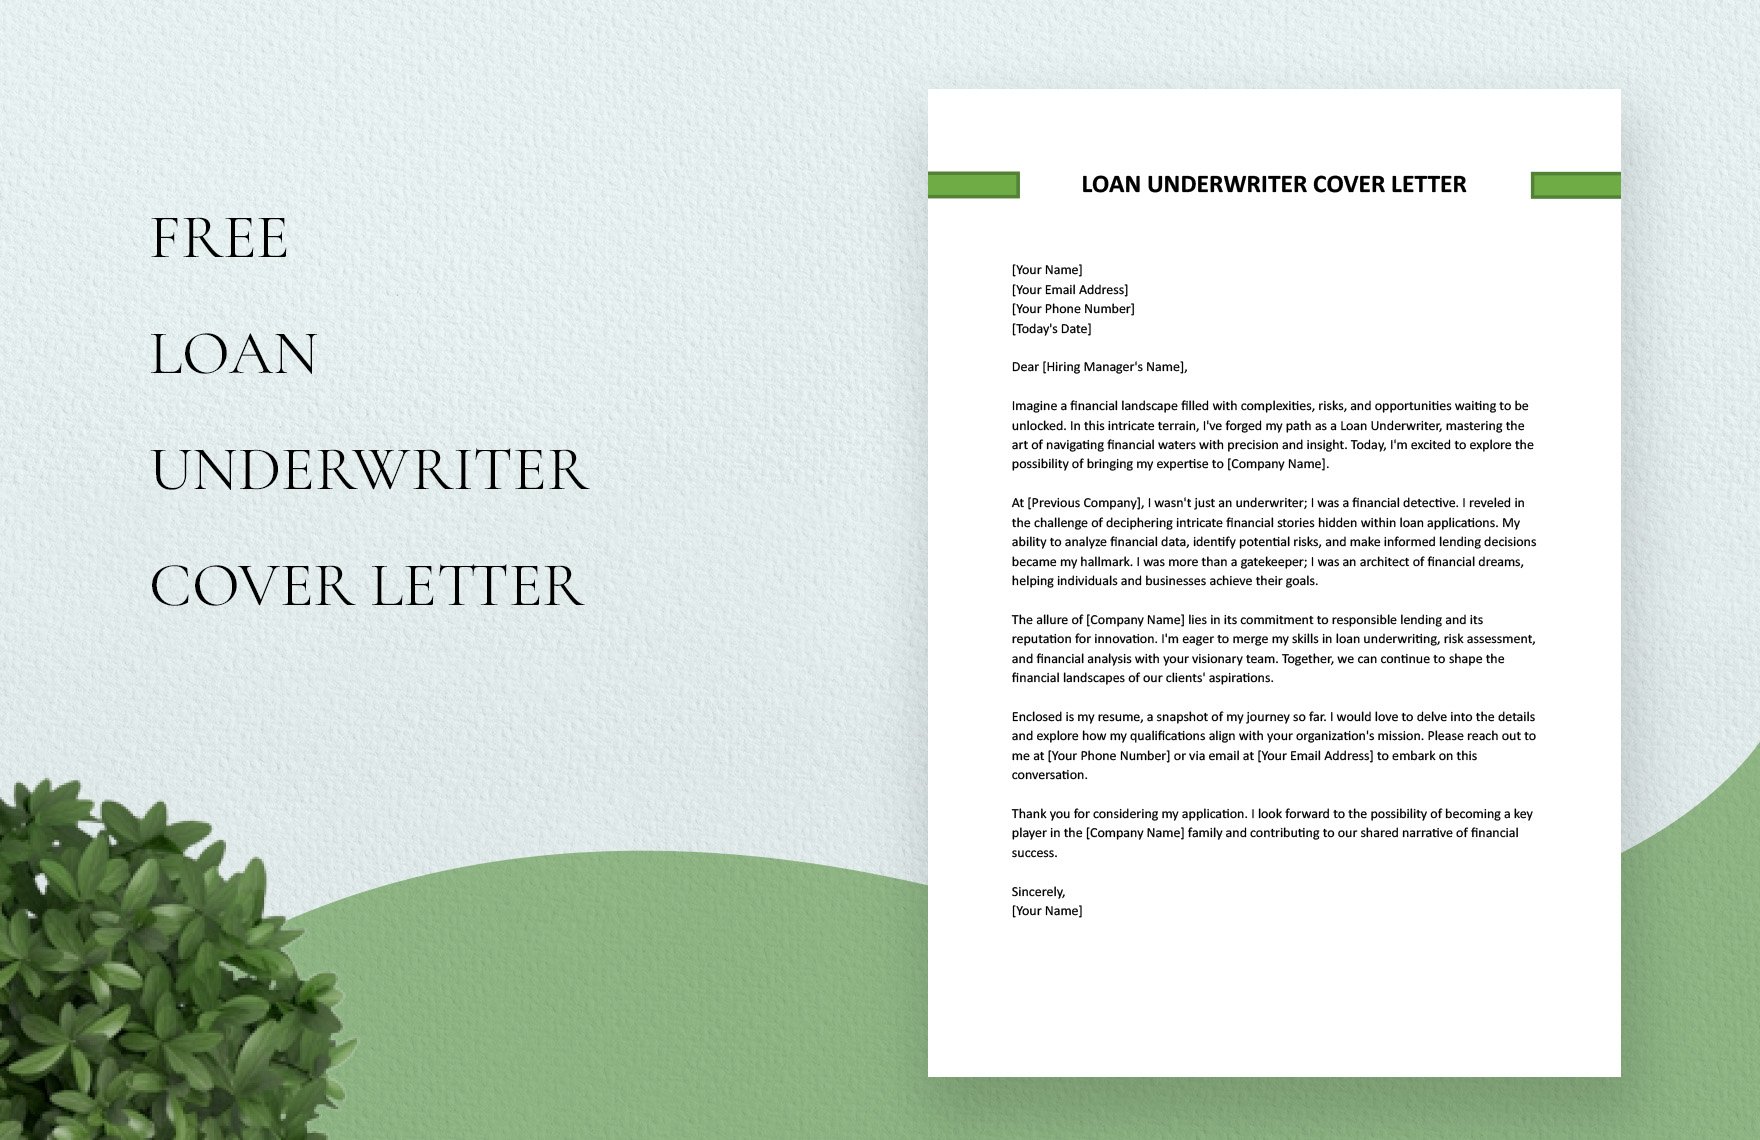 Loan Underwriter Cover Letter in Word, Google Docs